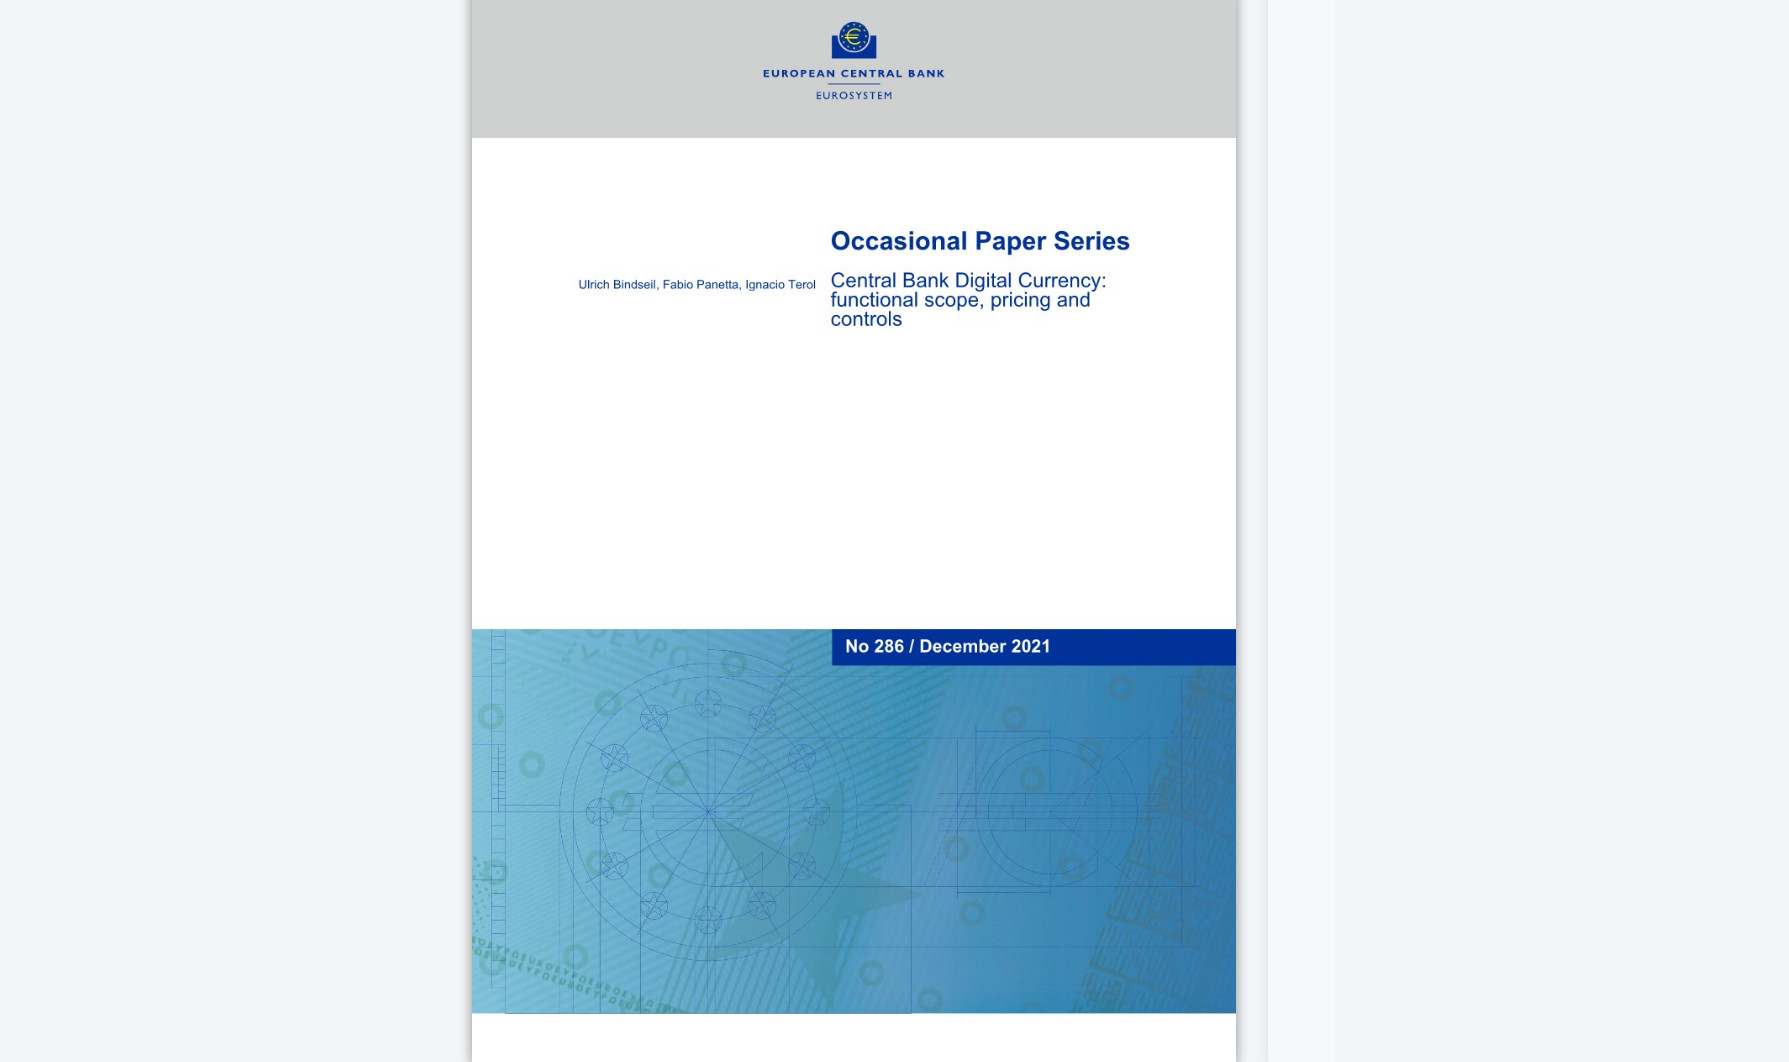 The European Central Bank (ECB): The most important paper about Central Bank Digital Currency